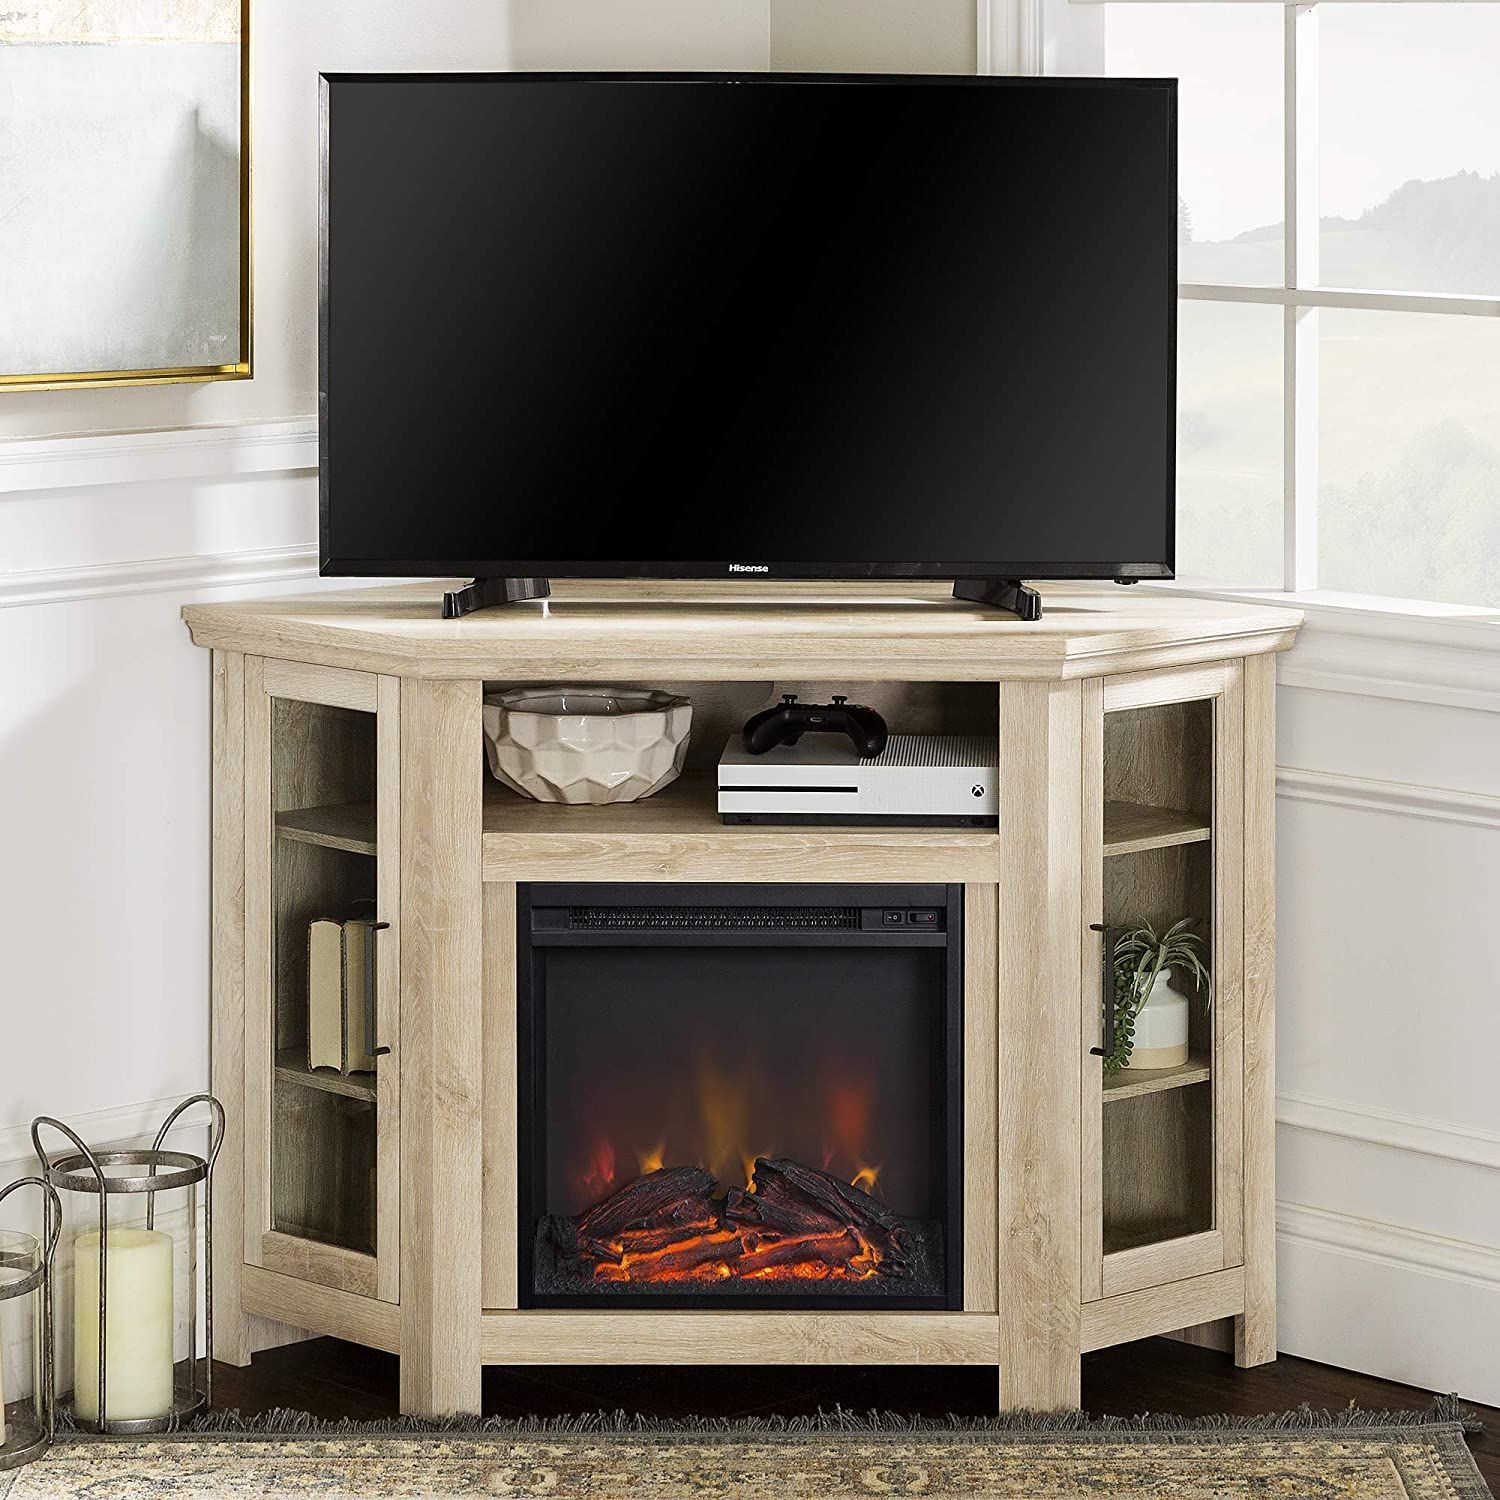 The 9 Best Fireplace Tv Stands 2021, Best Electric Fireplace Entertainment Center